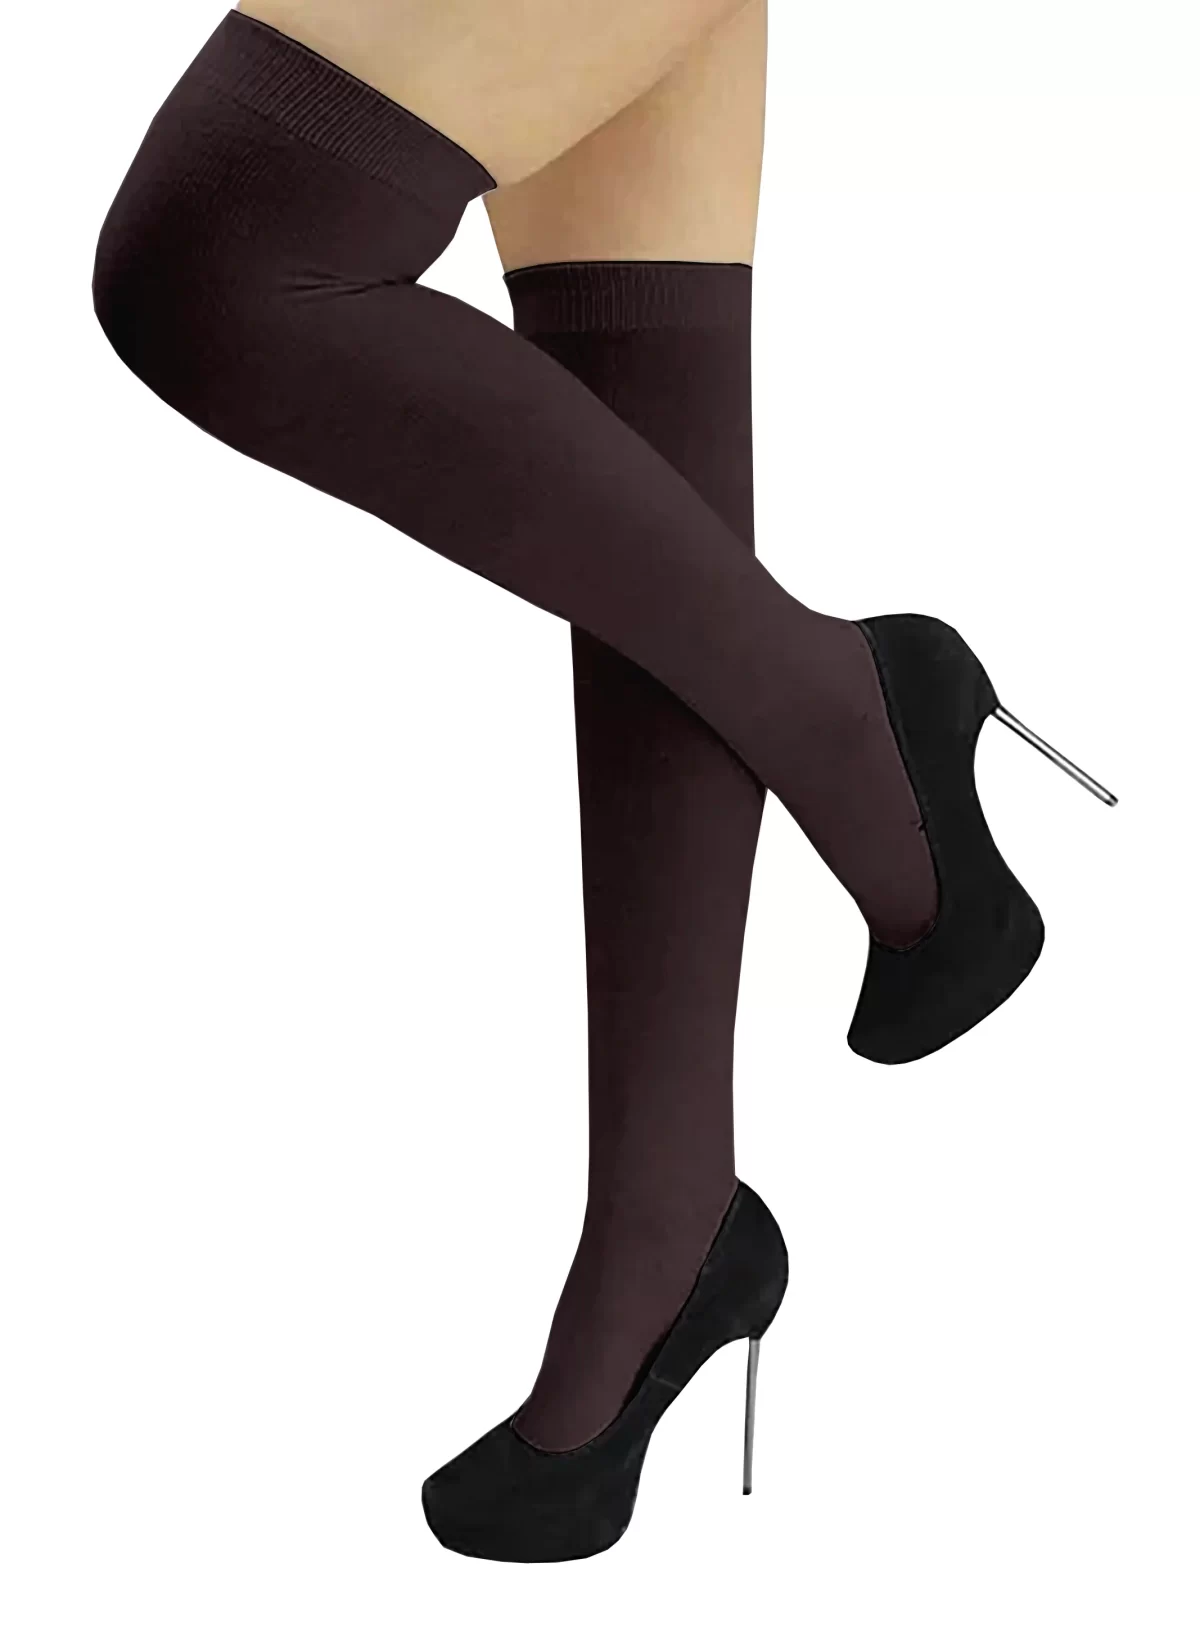 Brown Black Girls and Women's Thigh High Socks ( Free Size )3